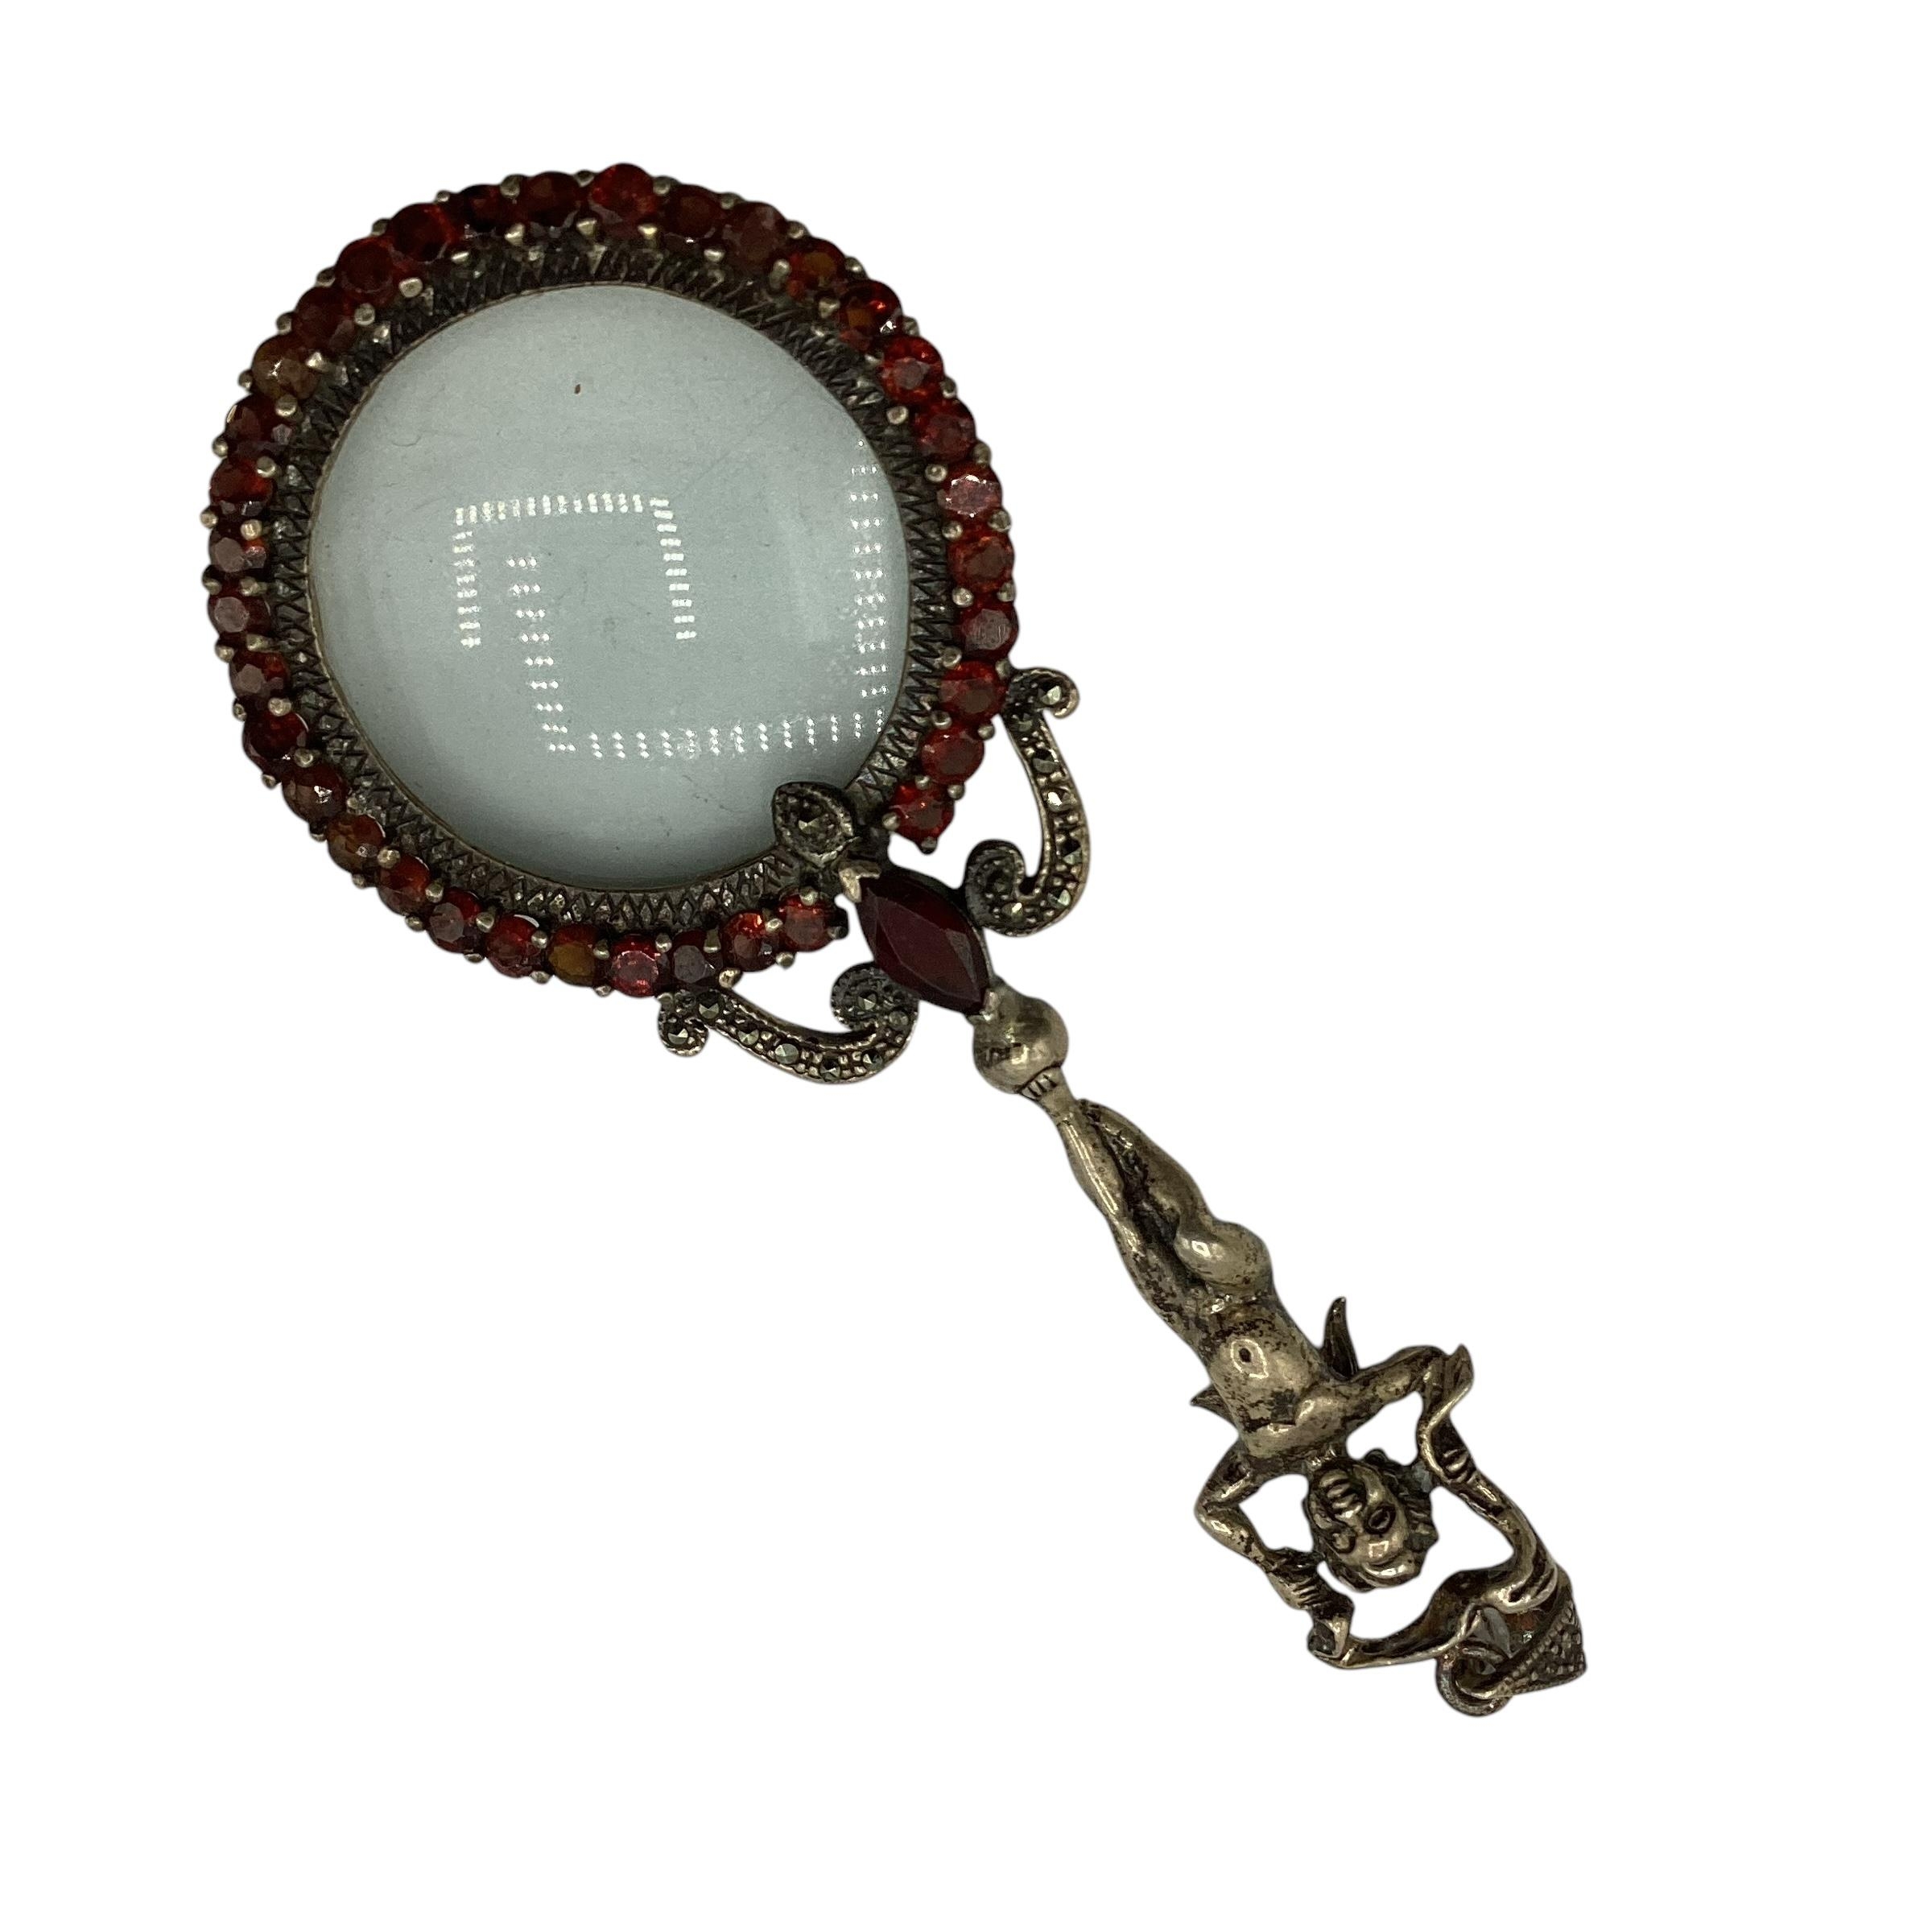 A 924 silver magnifying glass with cast putti handle and red garnet surround.